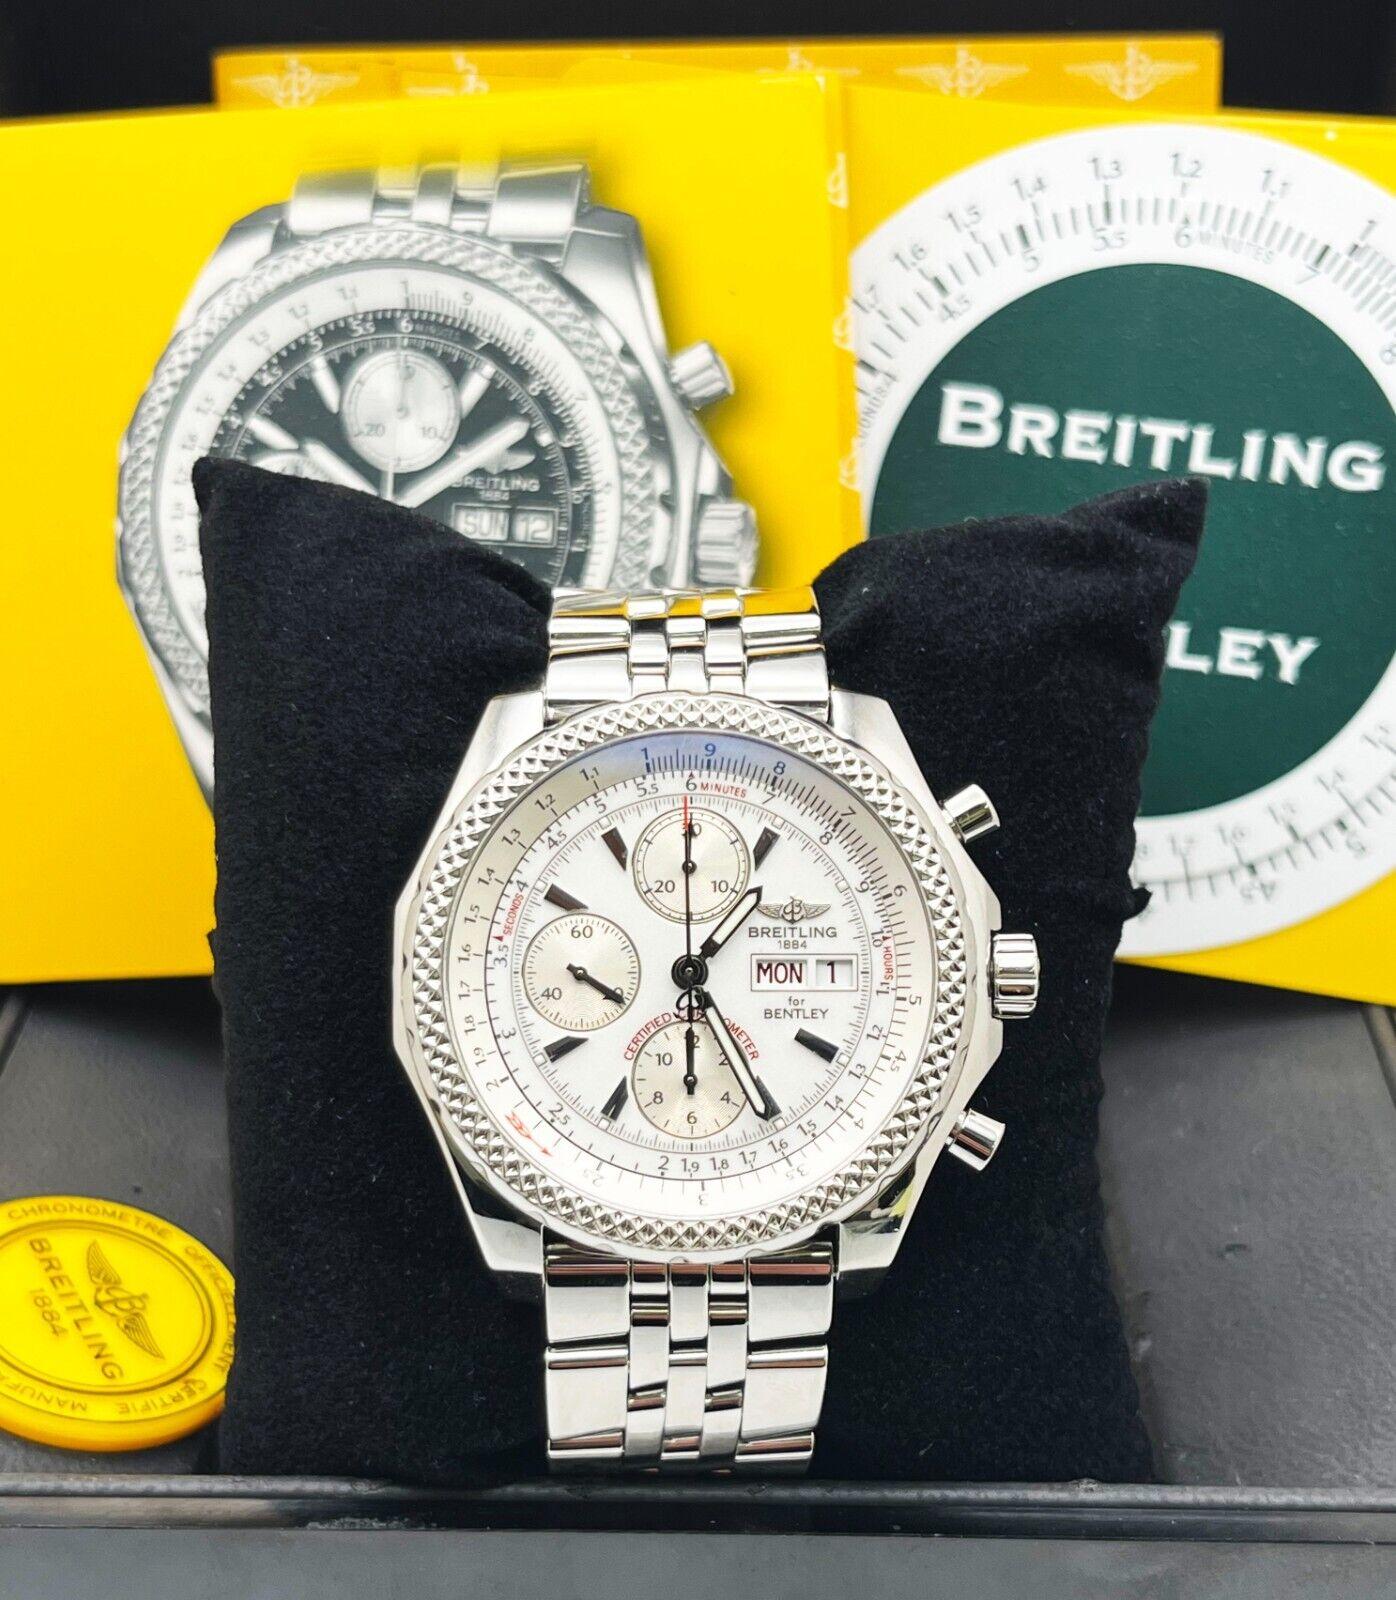 Style Number: A13362

Year: 2005

Model: Bentley Motors GT

Case Material: Stainless Steel

Band: Stainless Steel

Bezel: Stainless Steel

Dial: White

Face: Sapphire Crystal

Case Size: 45mm

Includes: 

-Breitling Box & Papers

-Certified